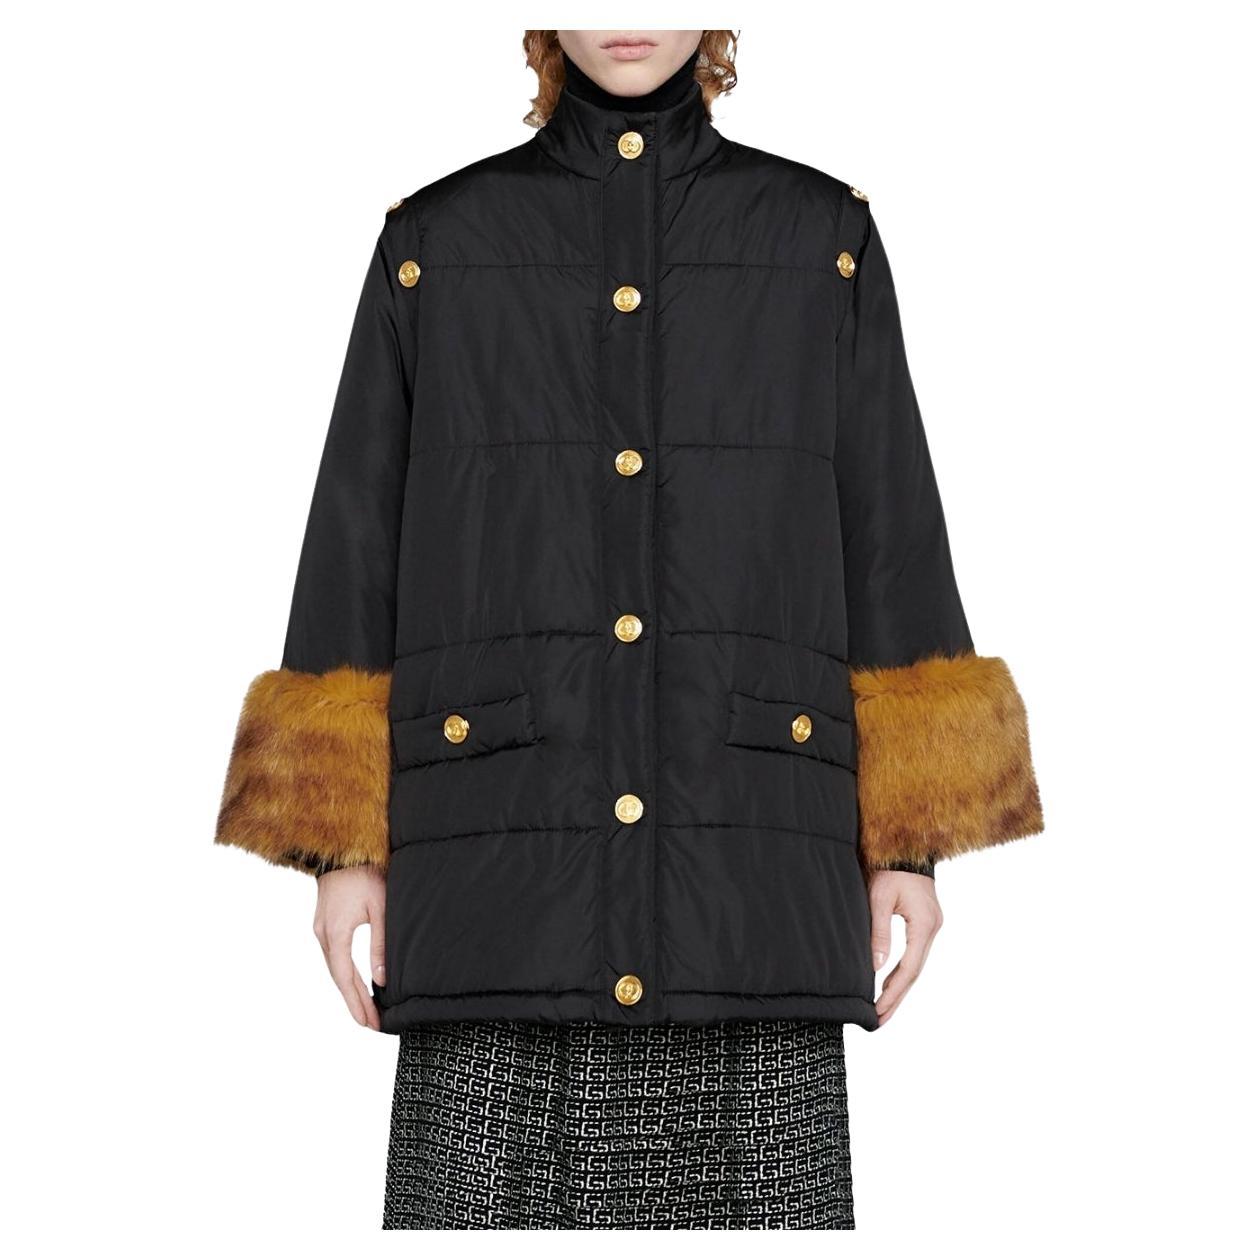 Black padded jacket from Gucci with detachable sleeves. The oversized fit keeps the silhouette looking modern and relaxed. 
Faux fur cuffs
Embossed gold-tone buttons. 
Stand up collar
Front button fastening
Faux fur trim
Two front